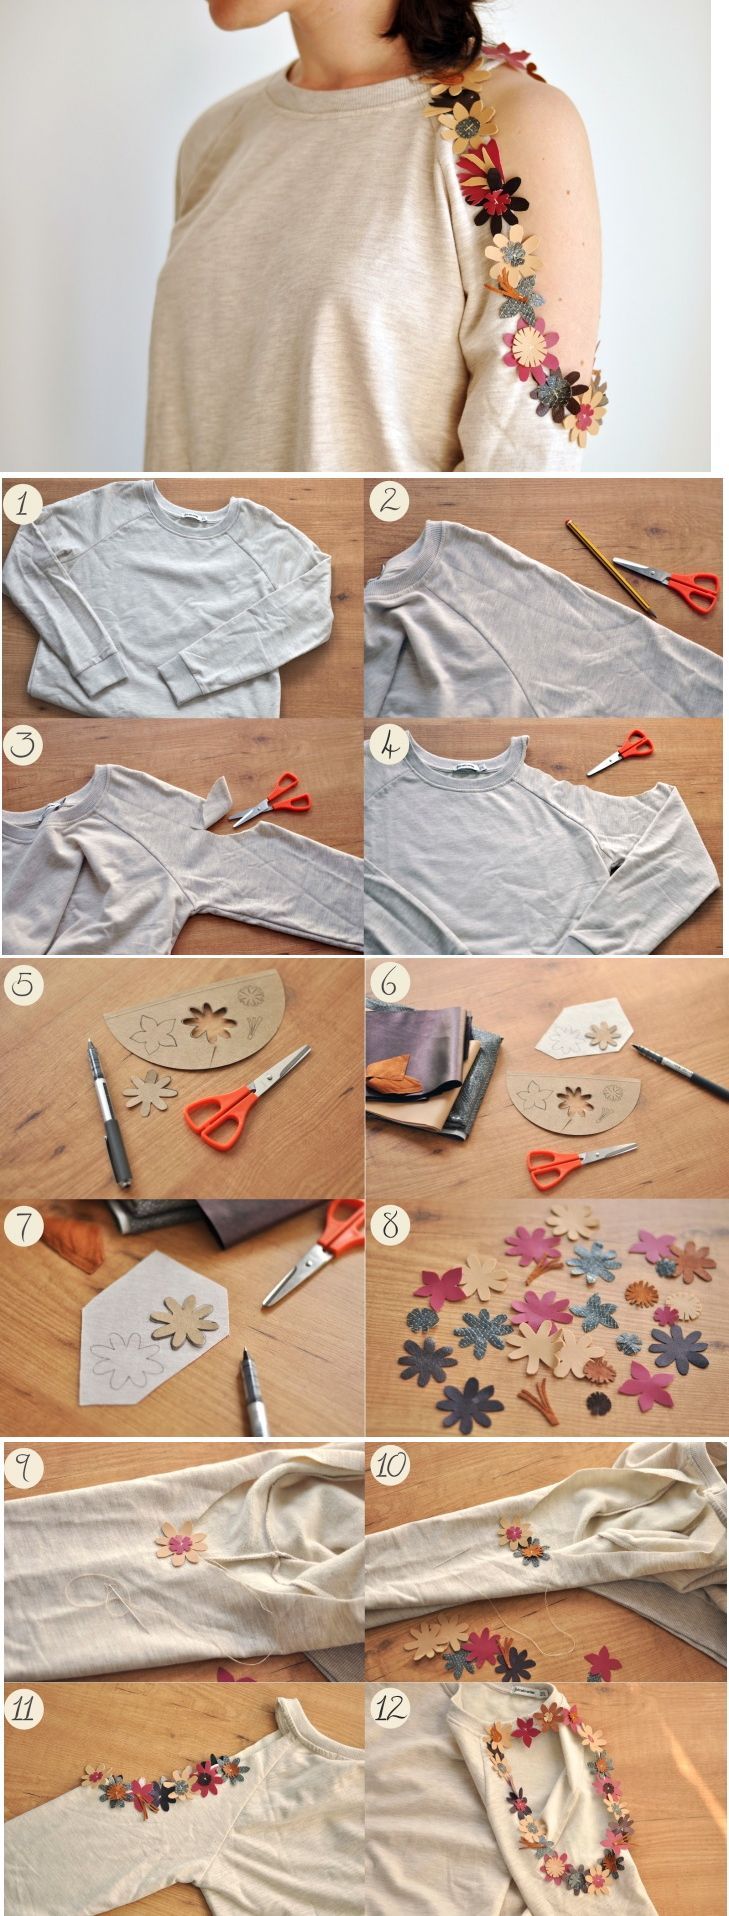 DIY: Cut out sweatshirt with flowers -   16 DIY Clothes Crafts thoughts ideas